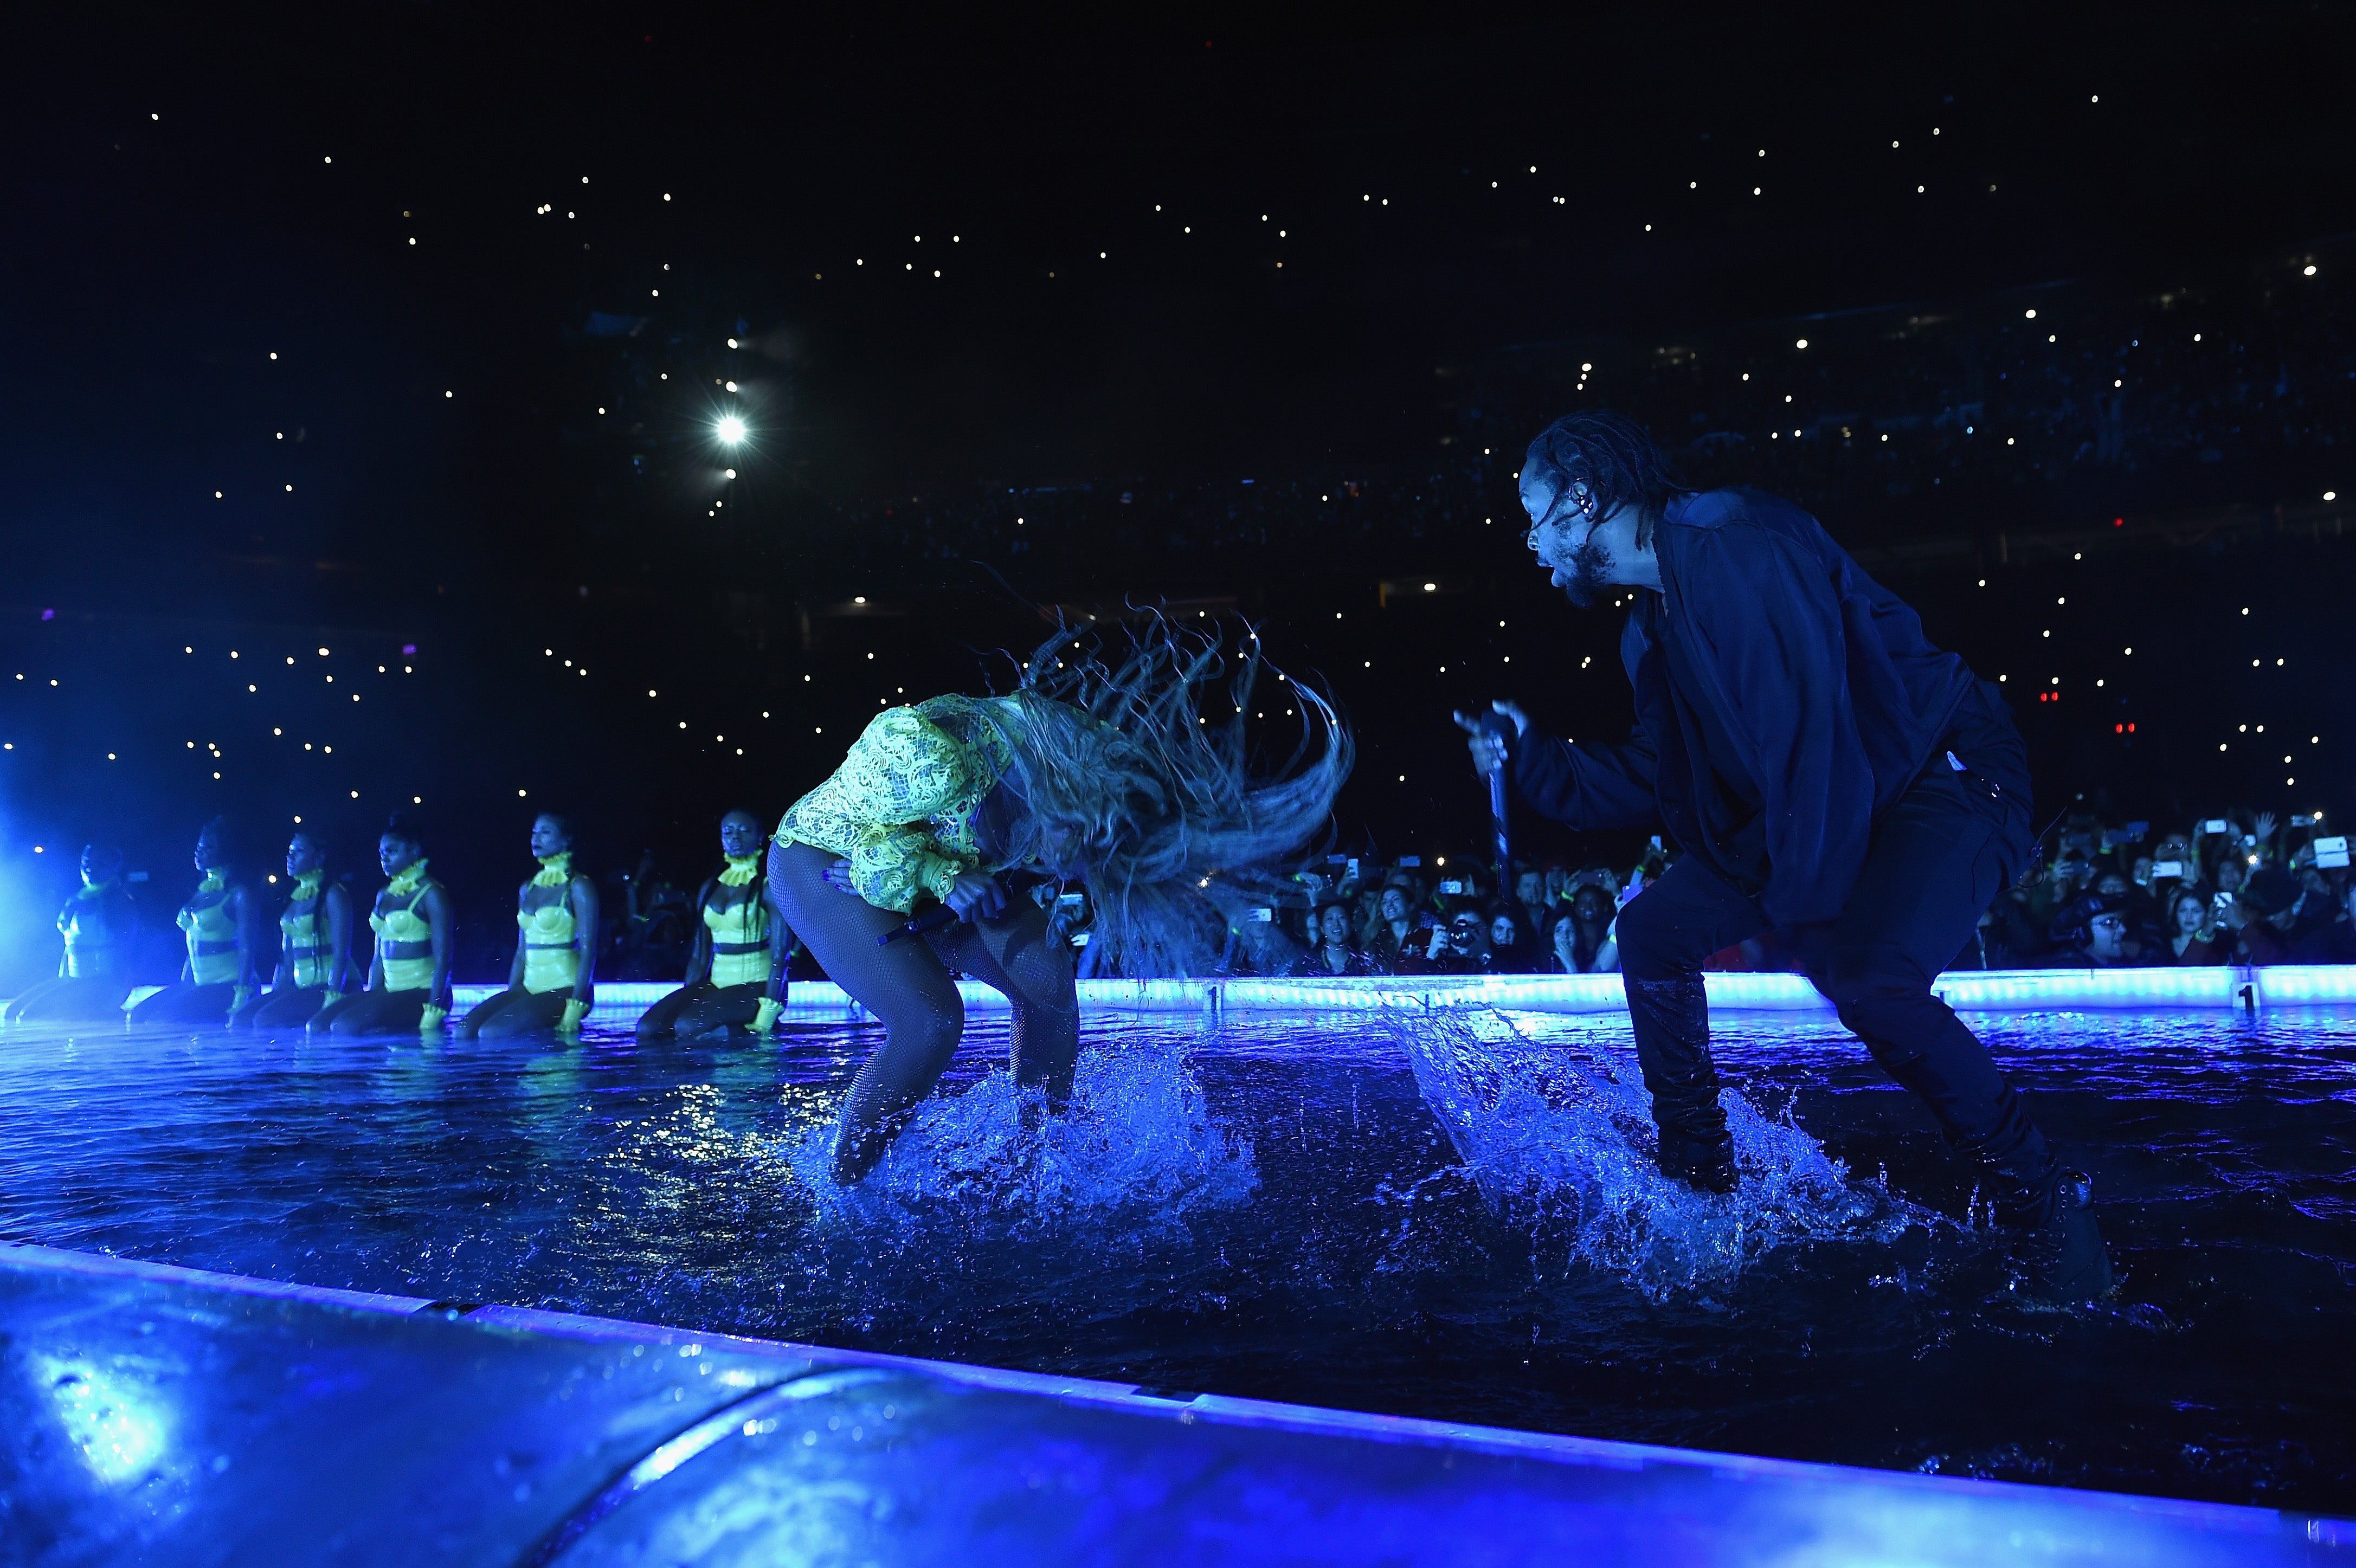 Beyoncé Closes Out 'Formation' Tour in Stunning Lemonade-Inspired Wardrobe
